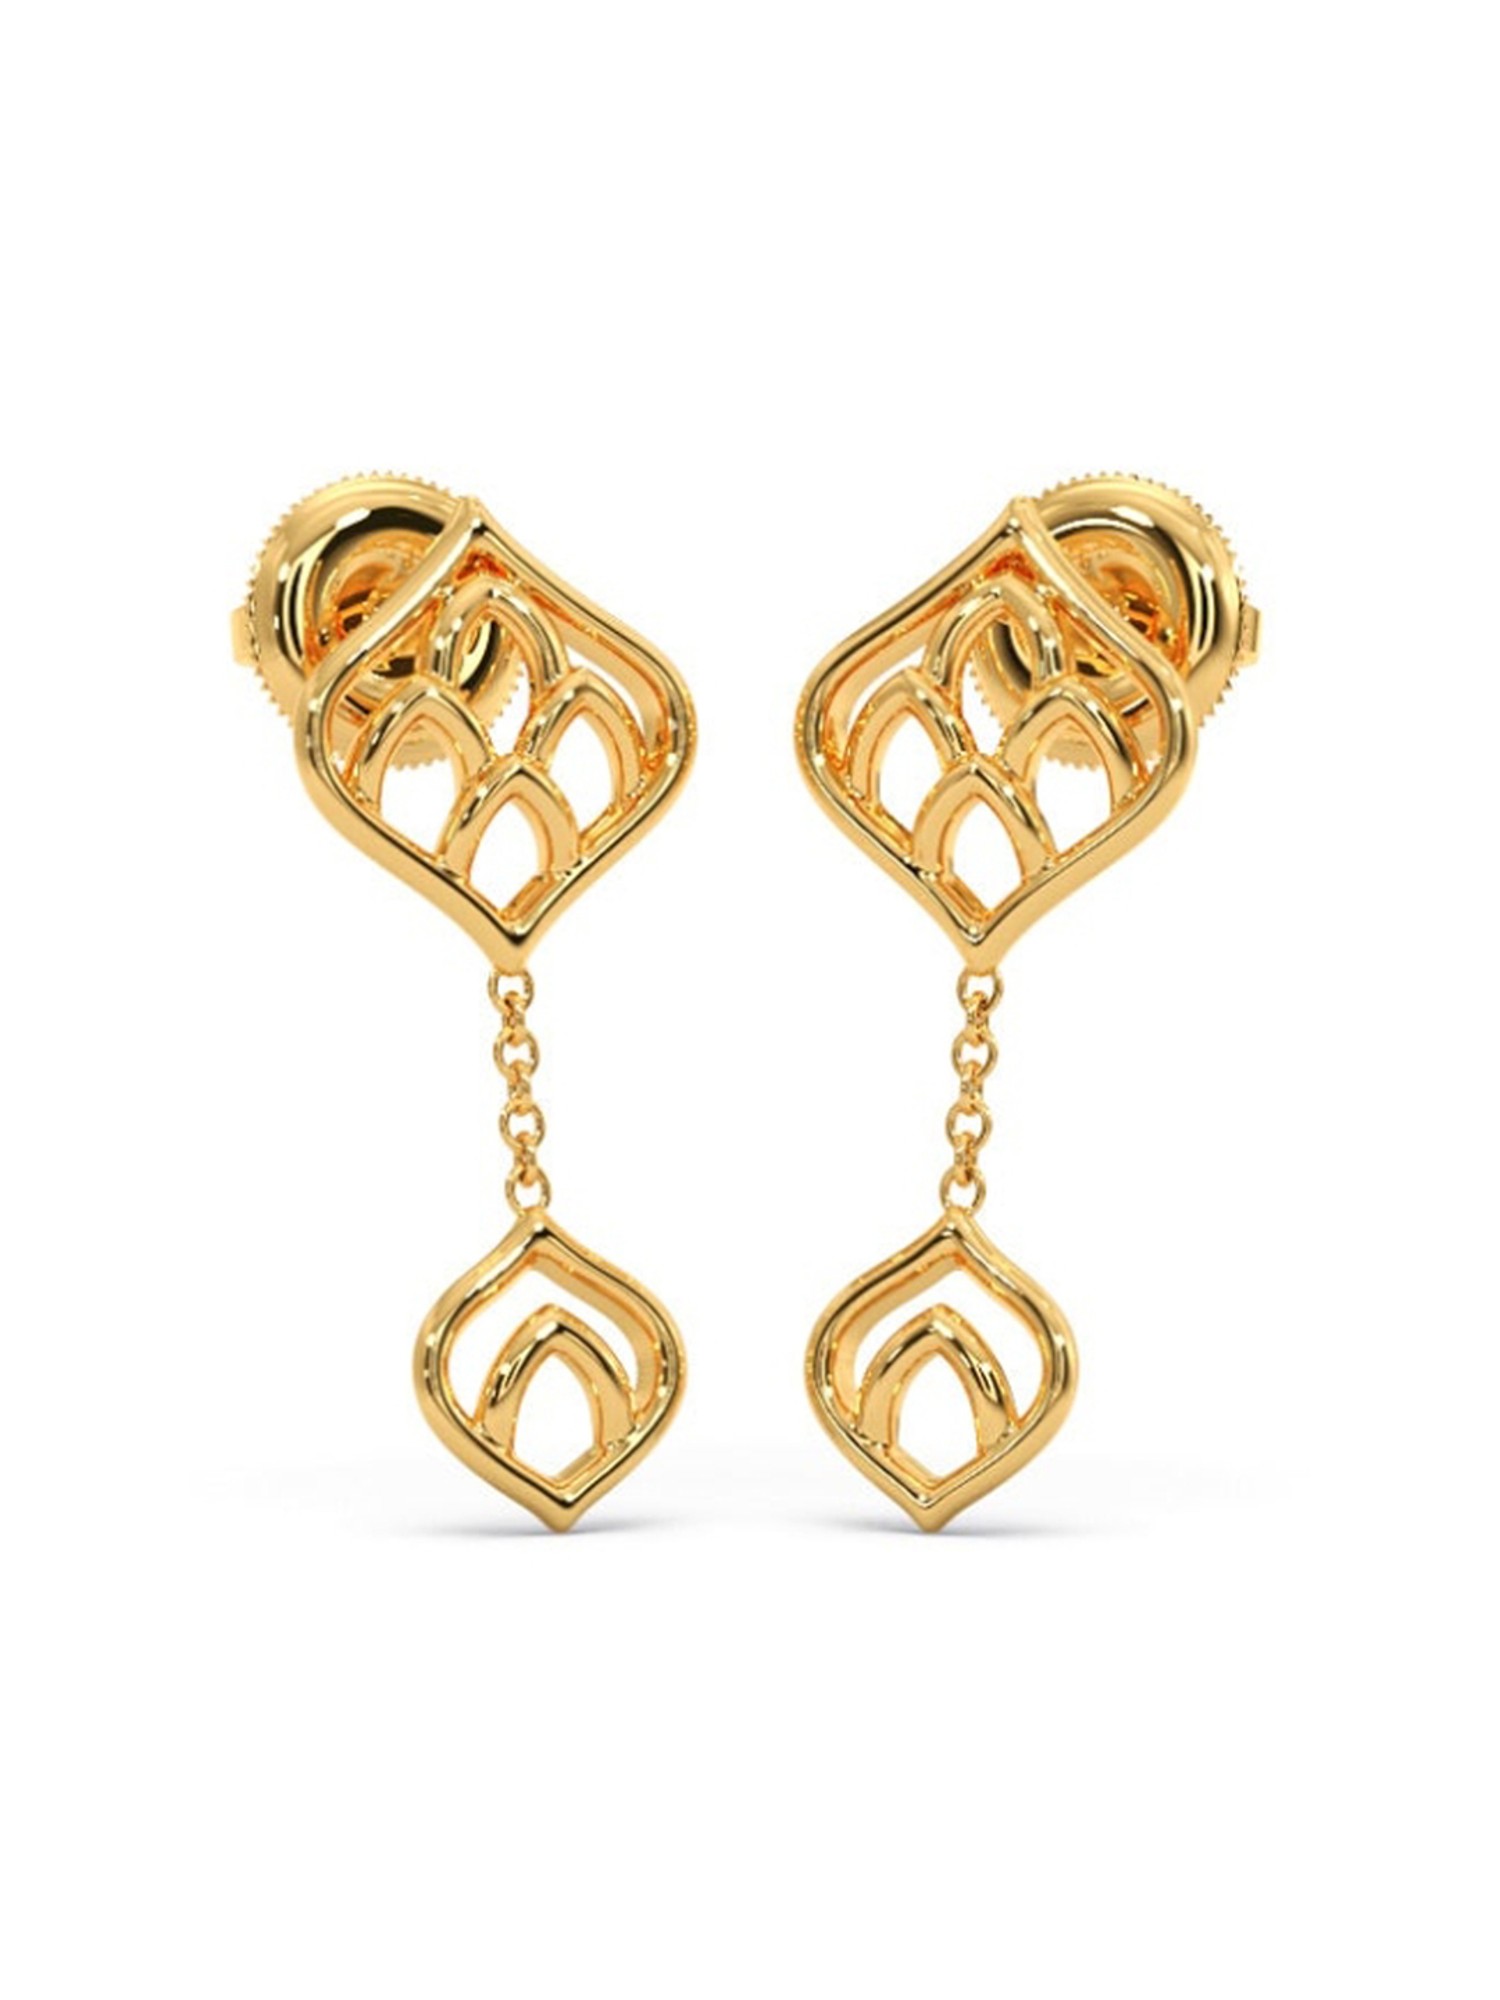 Buy Candere by Kalyan Jewellers 18k Drop Earrings Online At Best Price   Tata CLiQ